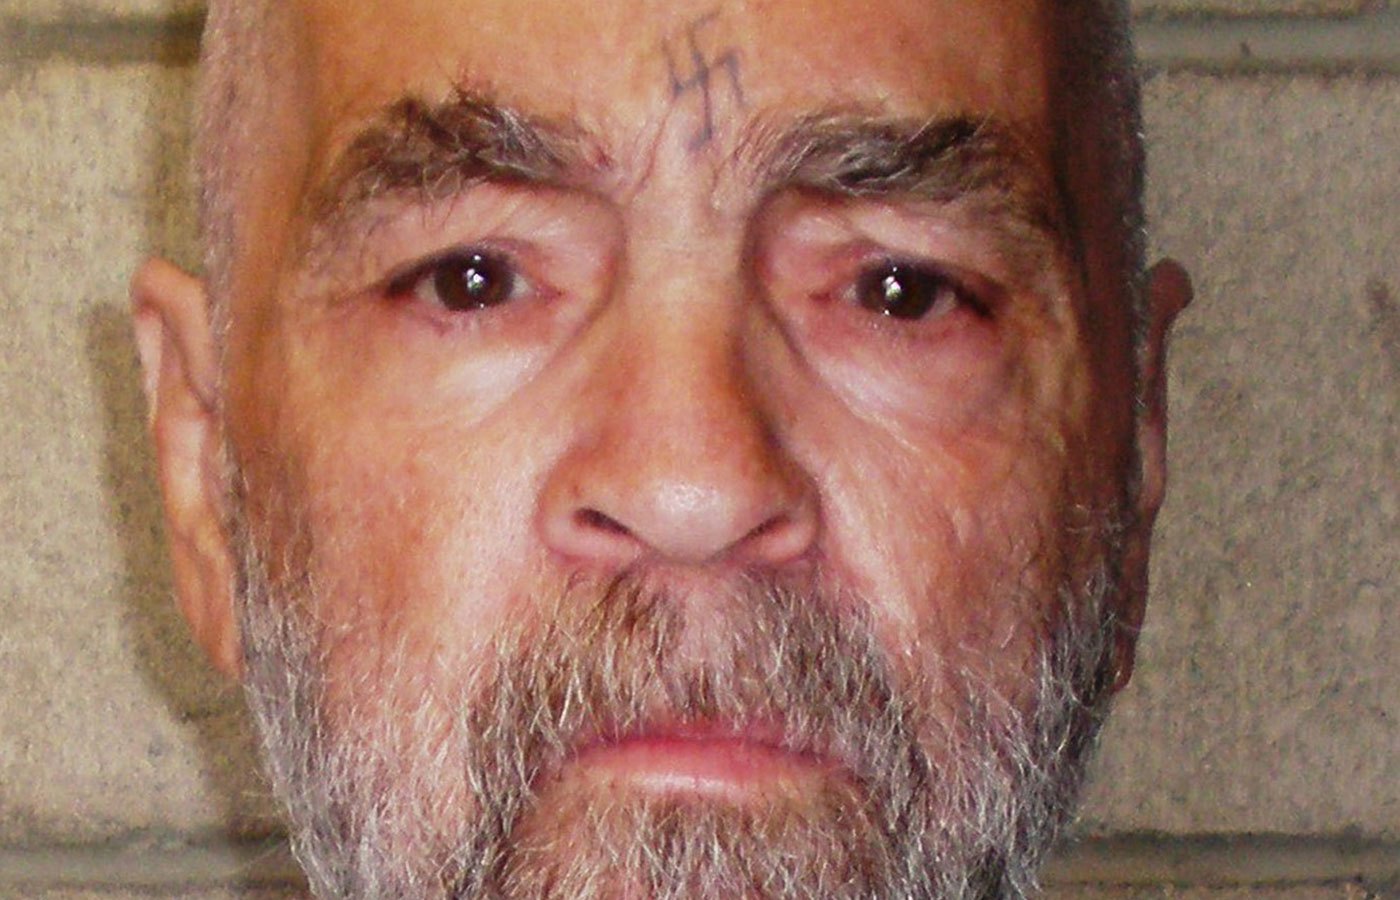 Charles Manson, notorious murderer, is set to marry behind bars